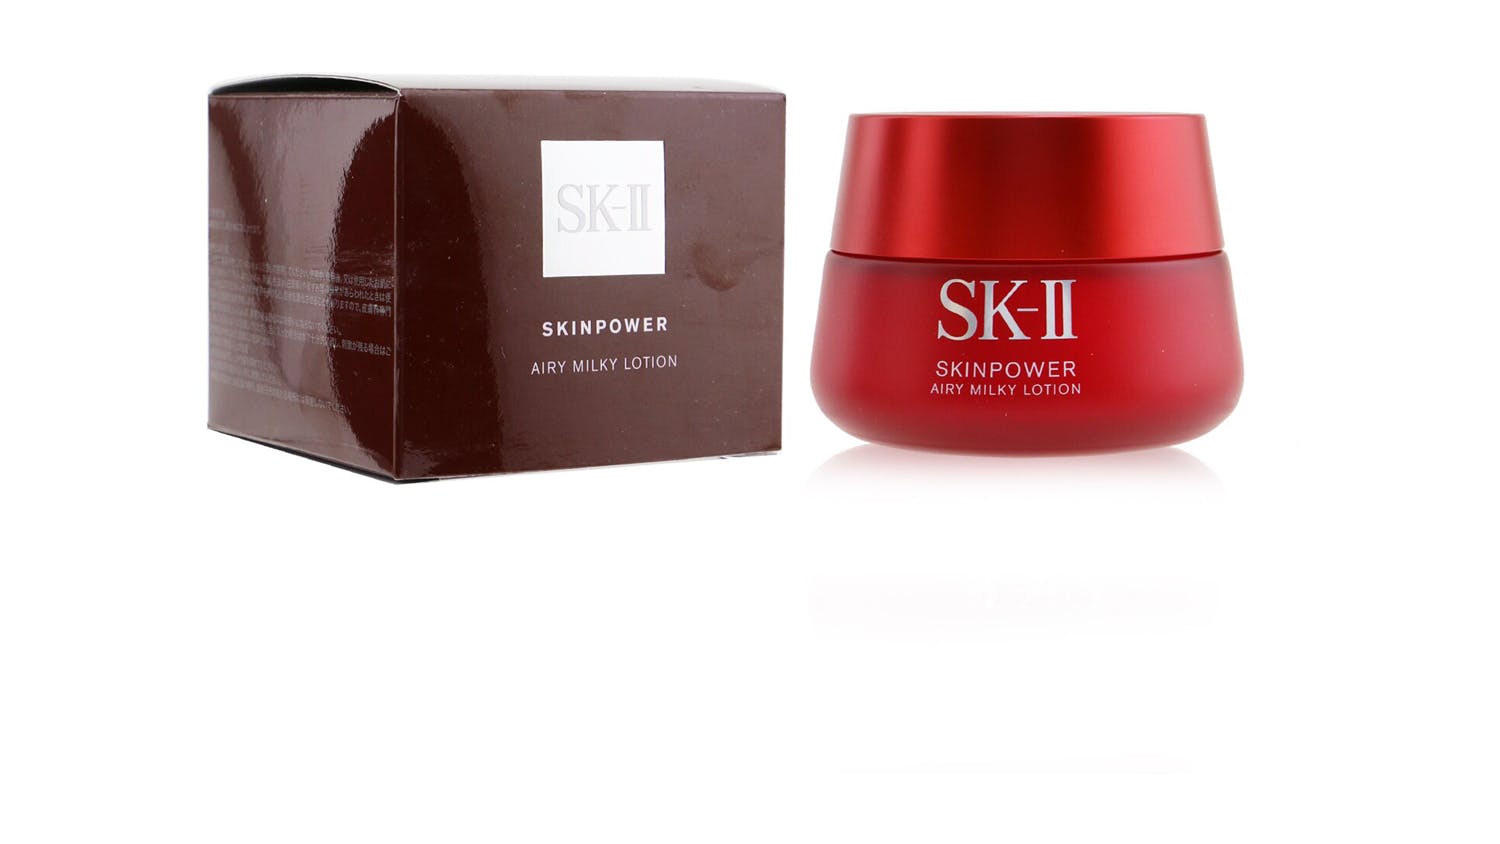 SK II Skinpower Airy Milky Lotion - 80g/2.7oz